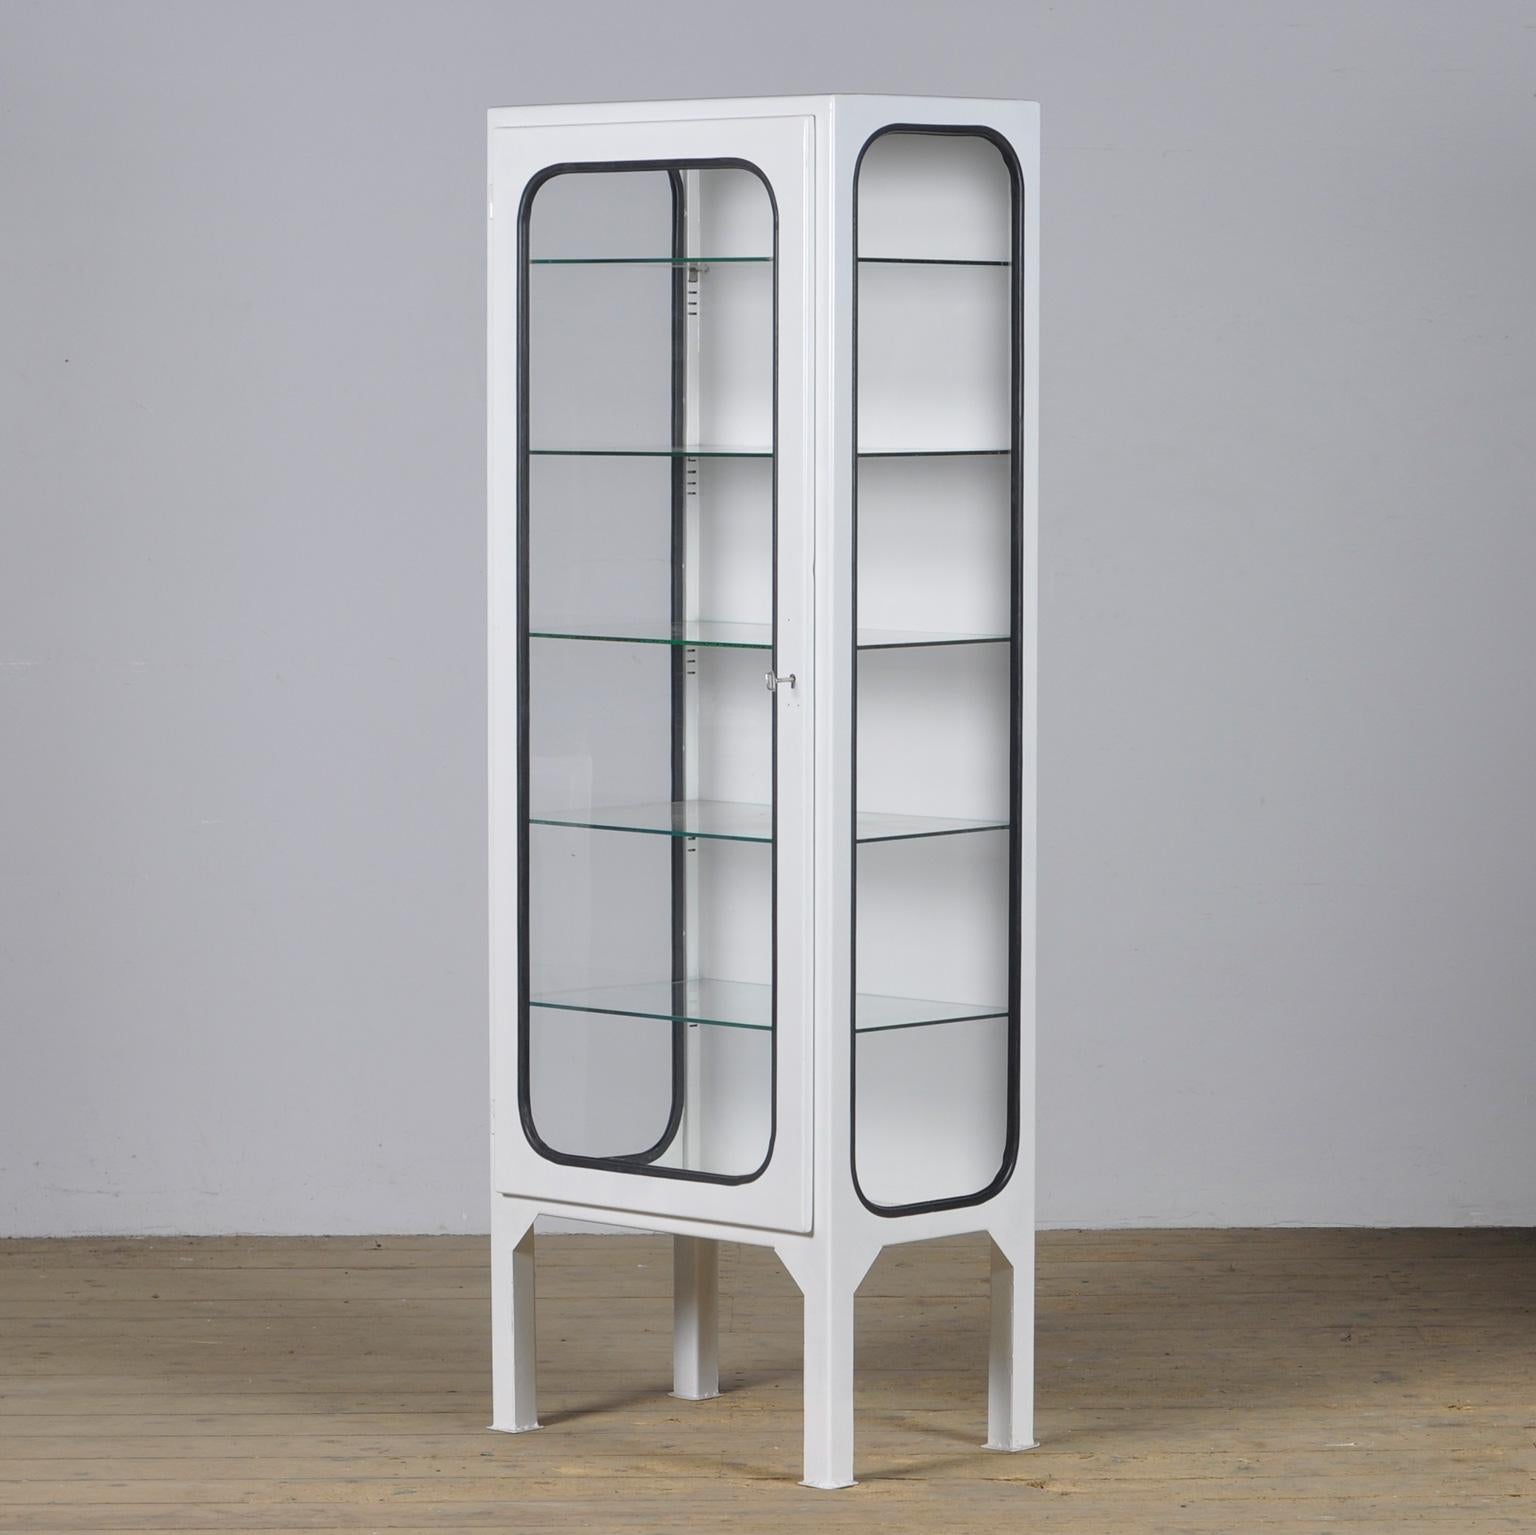 Hungarian Restored Vintage Iron And Glass Medical Cabinet, 1970s For Sale